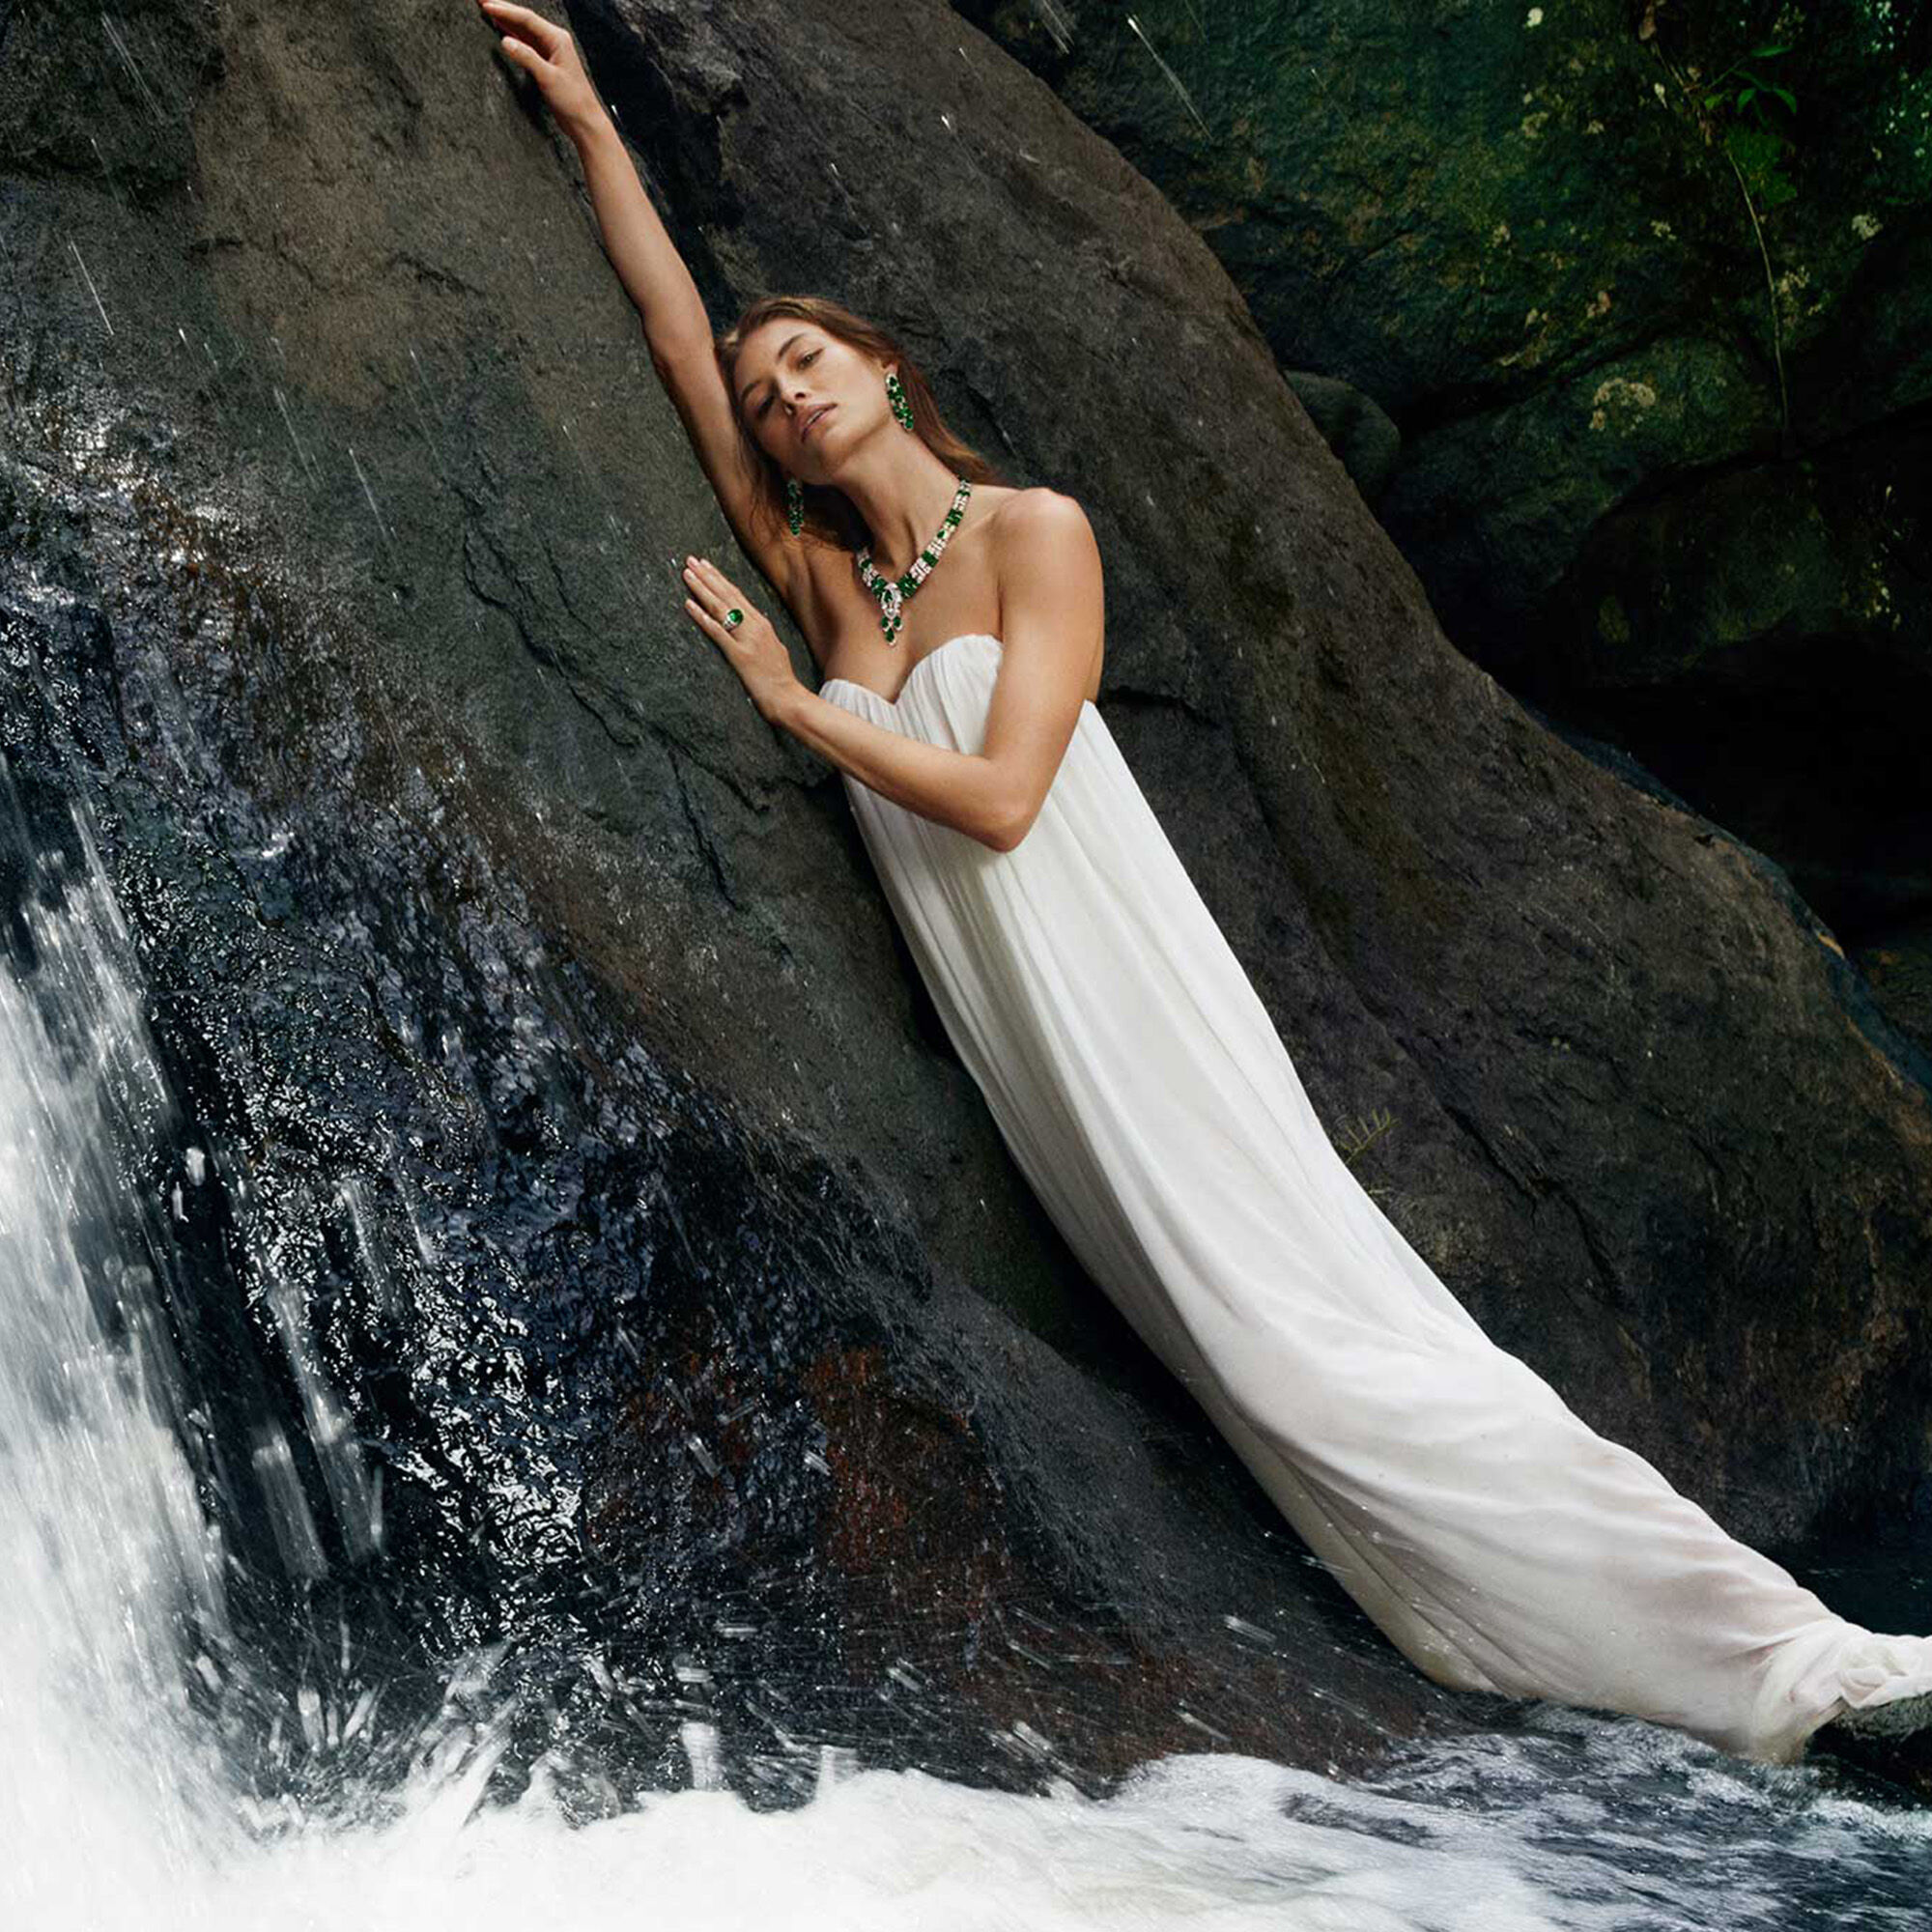 Model wearing Emerald and White Diamond High Jewellery Necklace, Earrings and Rings standing in waterfall